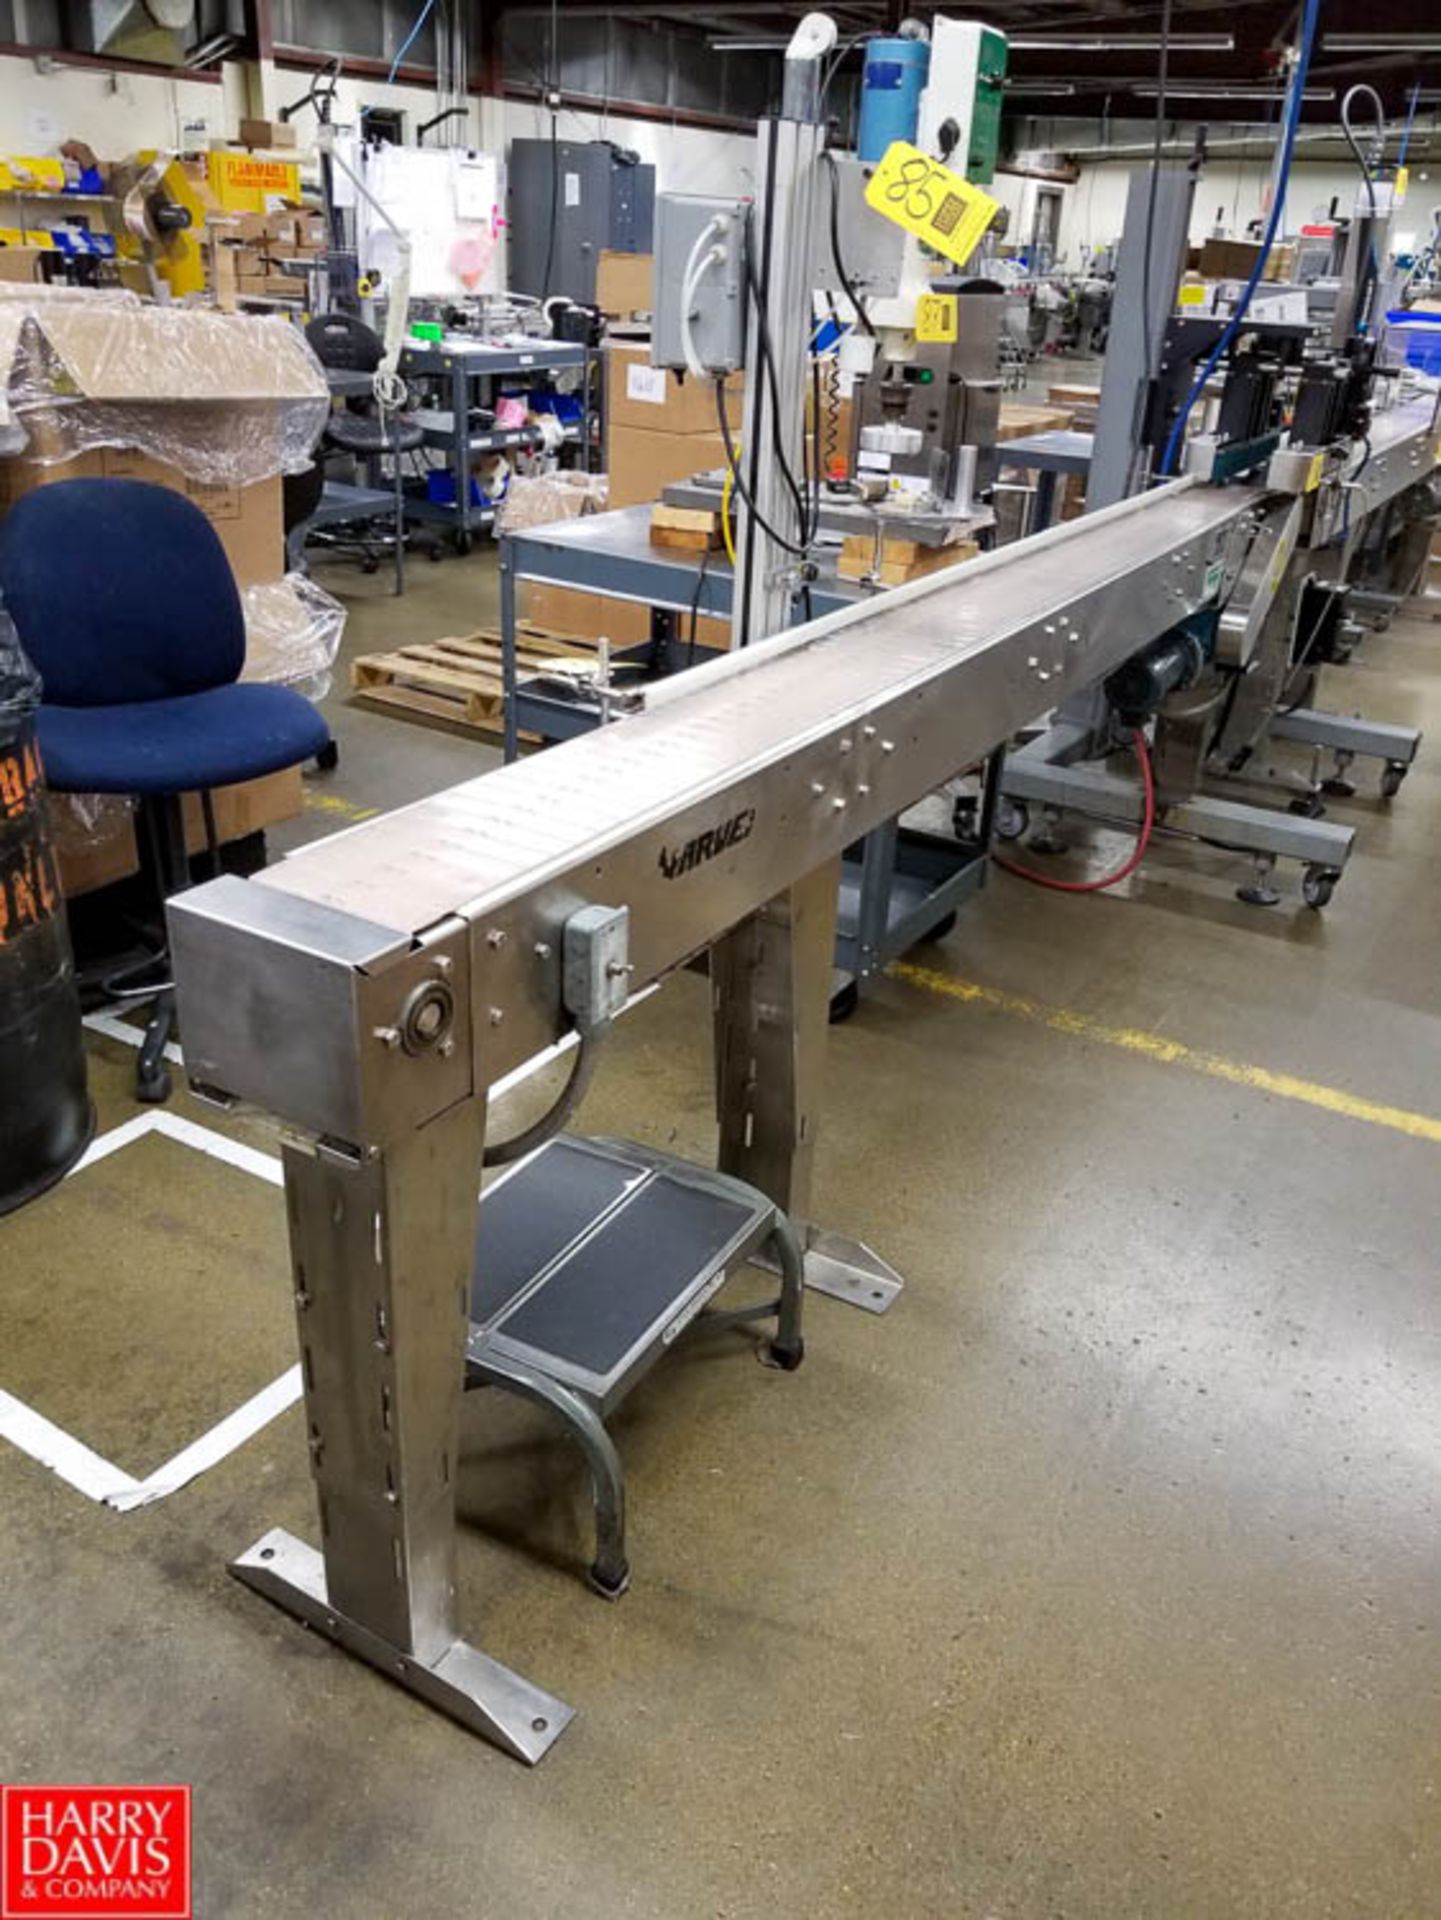 Garvey Chain Conveyor 11' x 7.5"" with Fitment Press Model: 9600 SN: 12467 Rigging Fee: $250